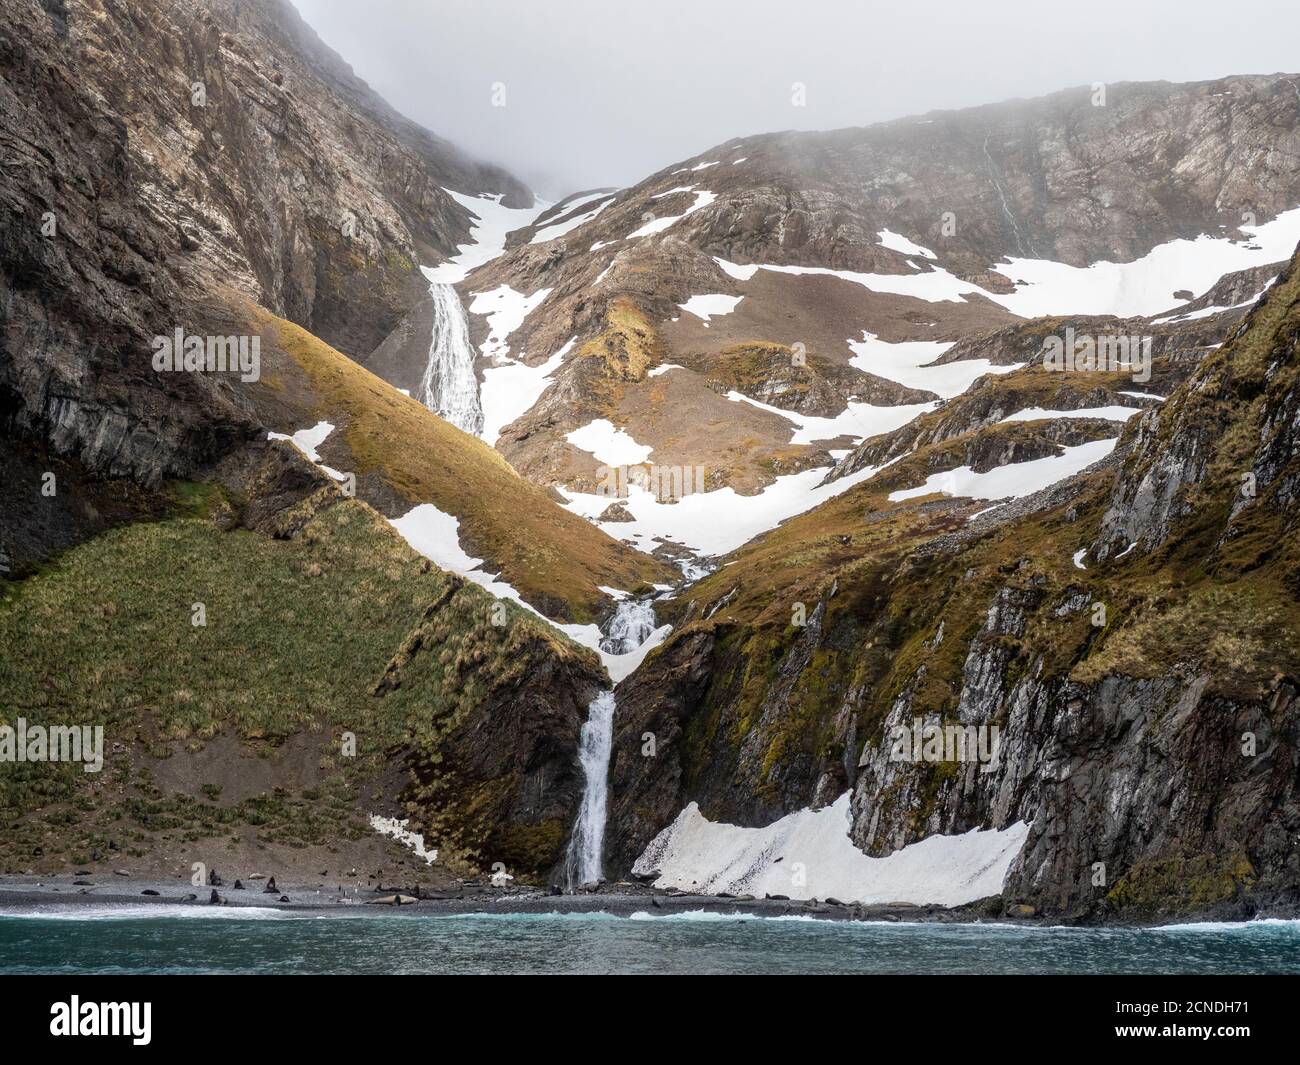 Glacier and meltwater waterfall in Hercules Bay, South Georgia, Polar Regions Stock Photo